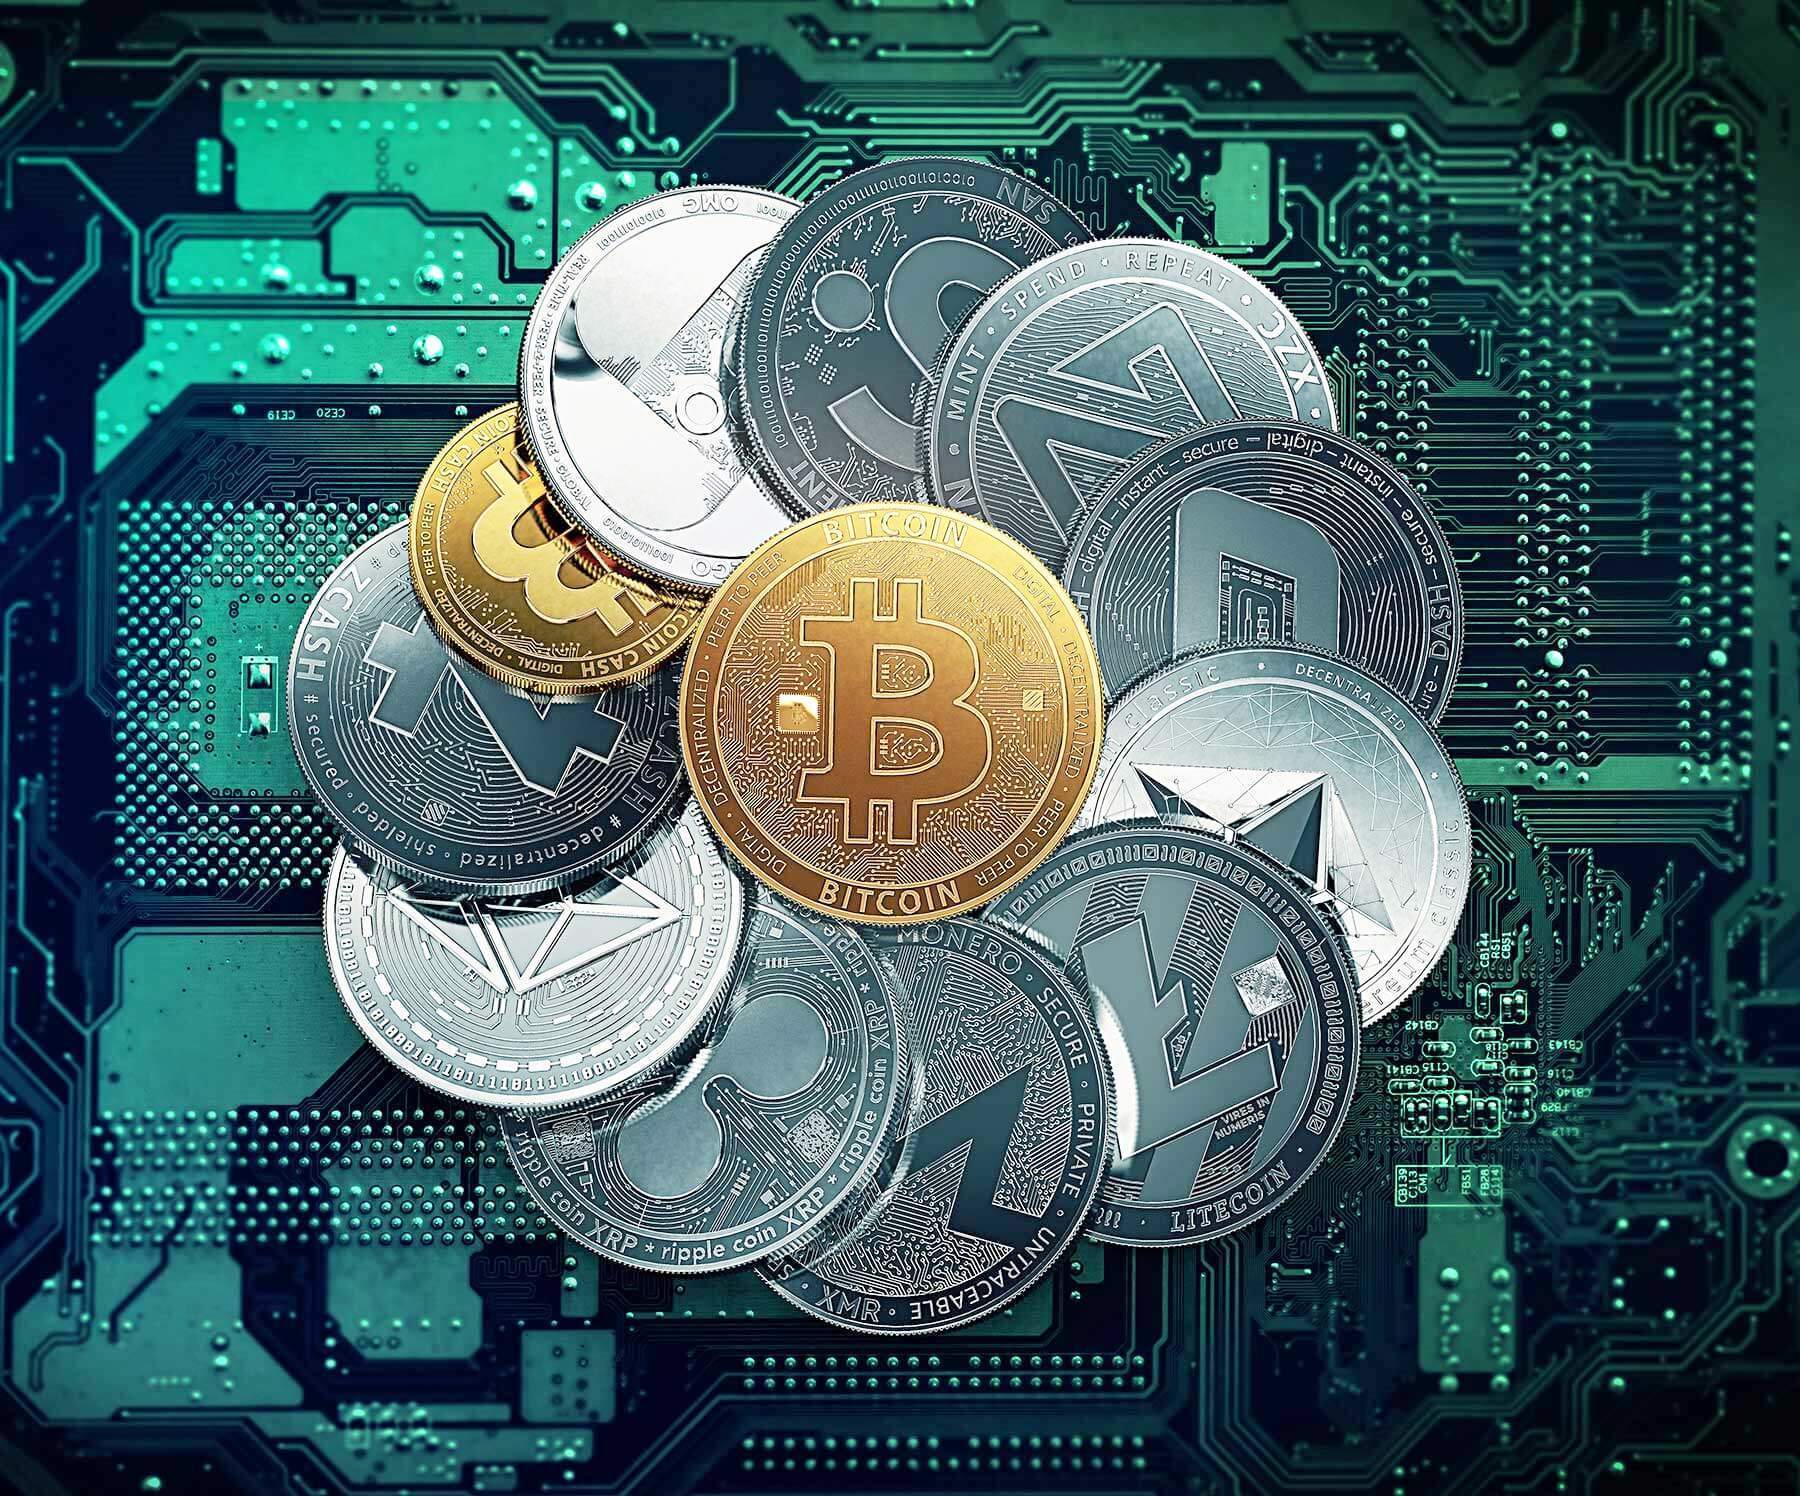 What is bitcoin and is it even the best system?